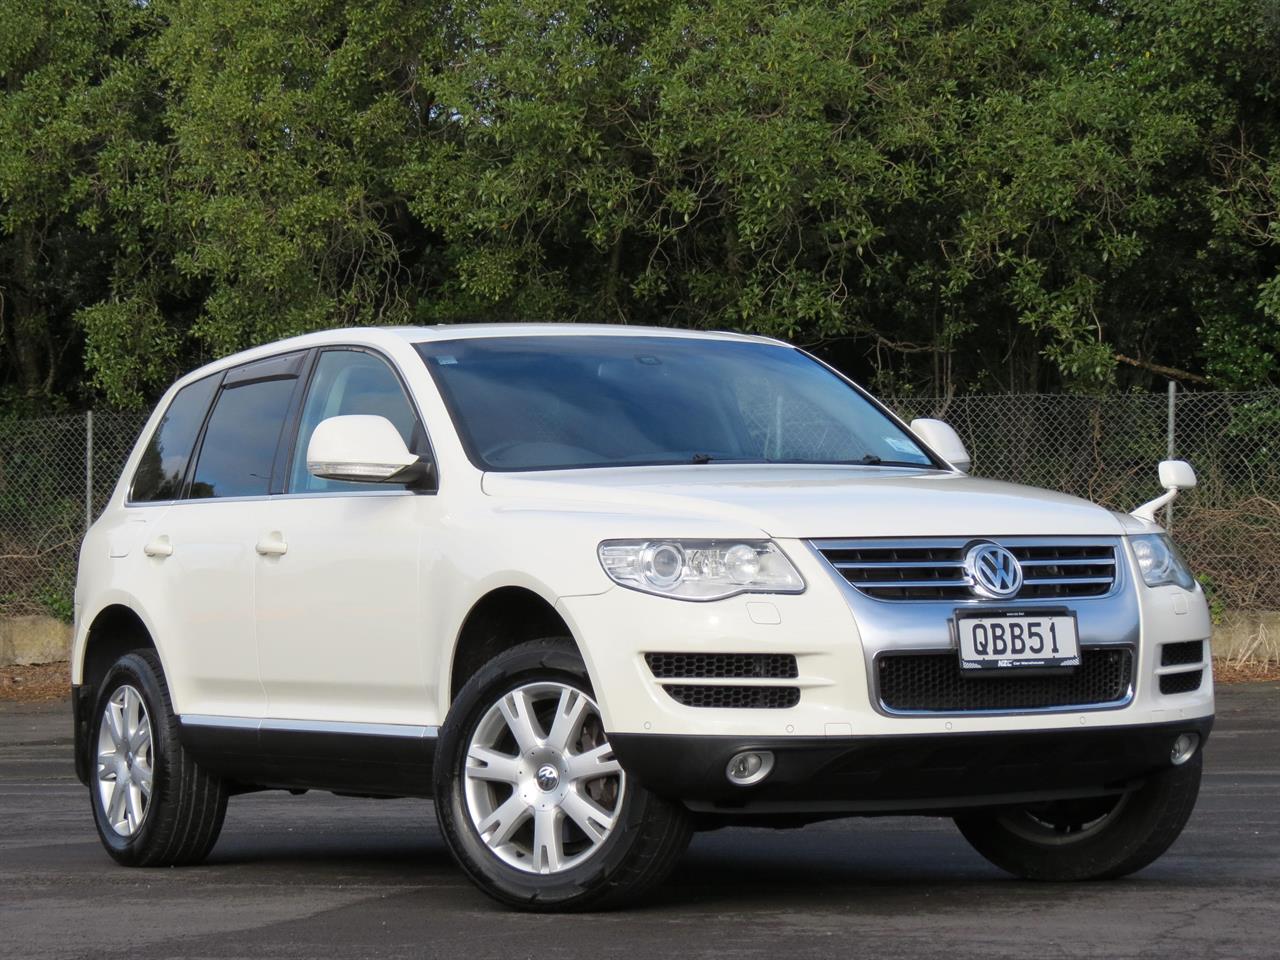 2007 Volkswagen Touareg LOW KM's +FULL LEATHER + 4WD +REAR CAMERA